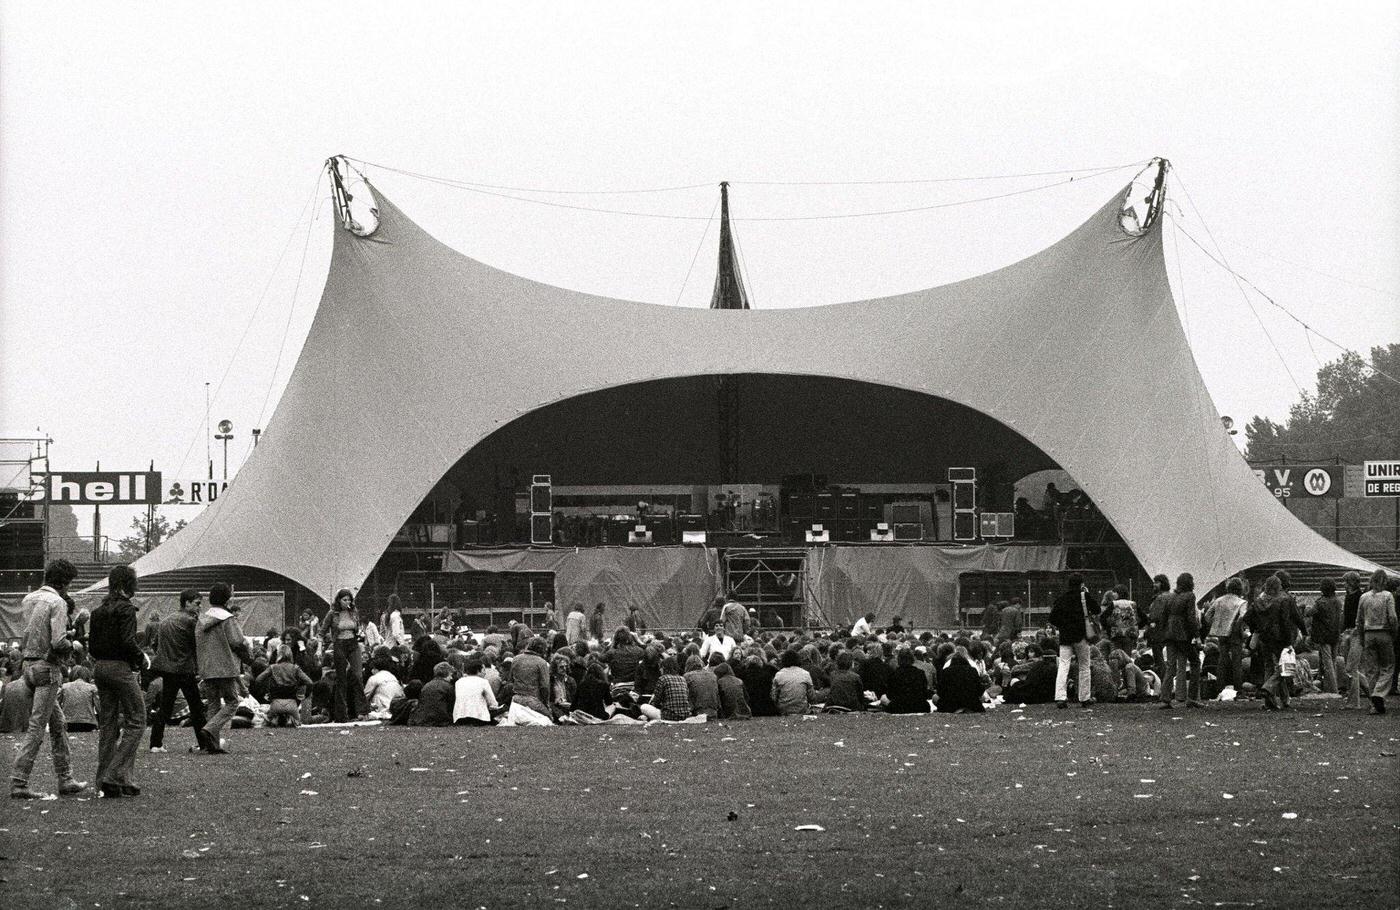 A panoramic view of the stage at Zuiderpark, FC Den Haag Stadion, during The Rolling Stones concert on 30 May 1976 in The Hague, Netherlands.